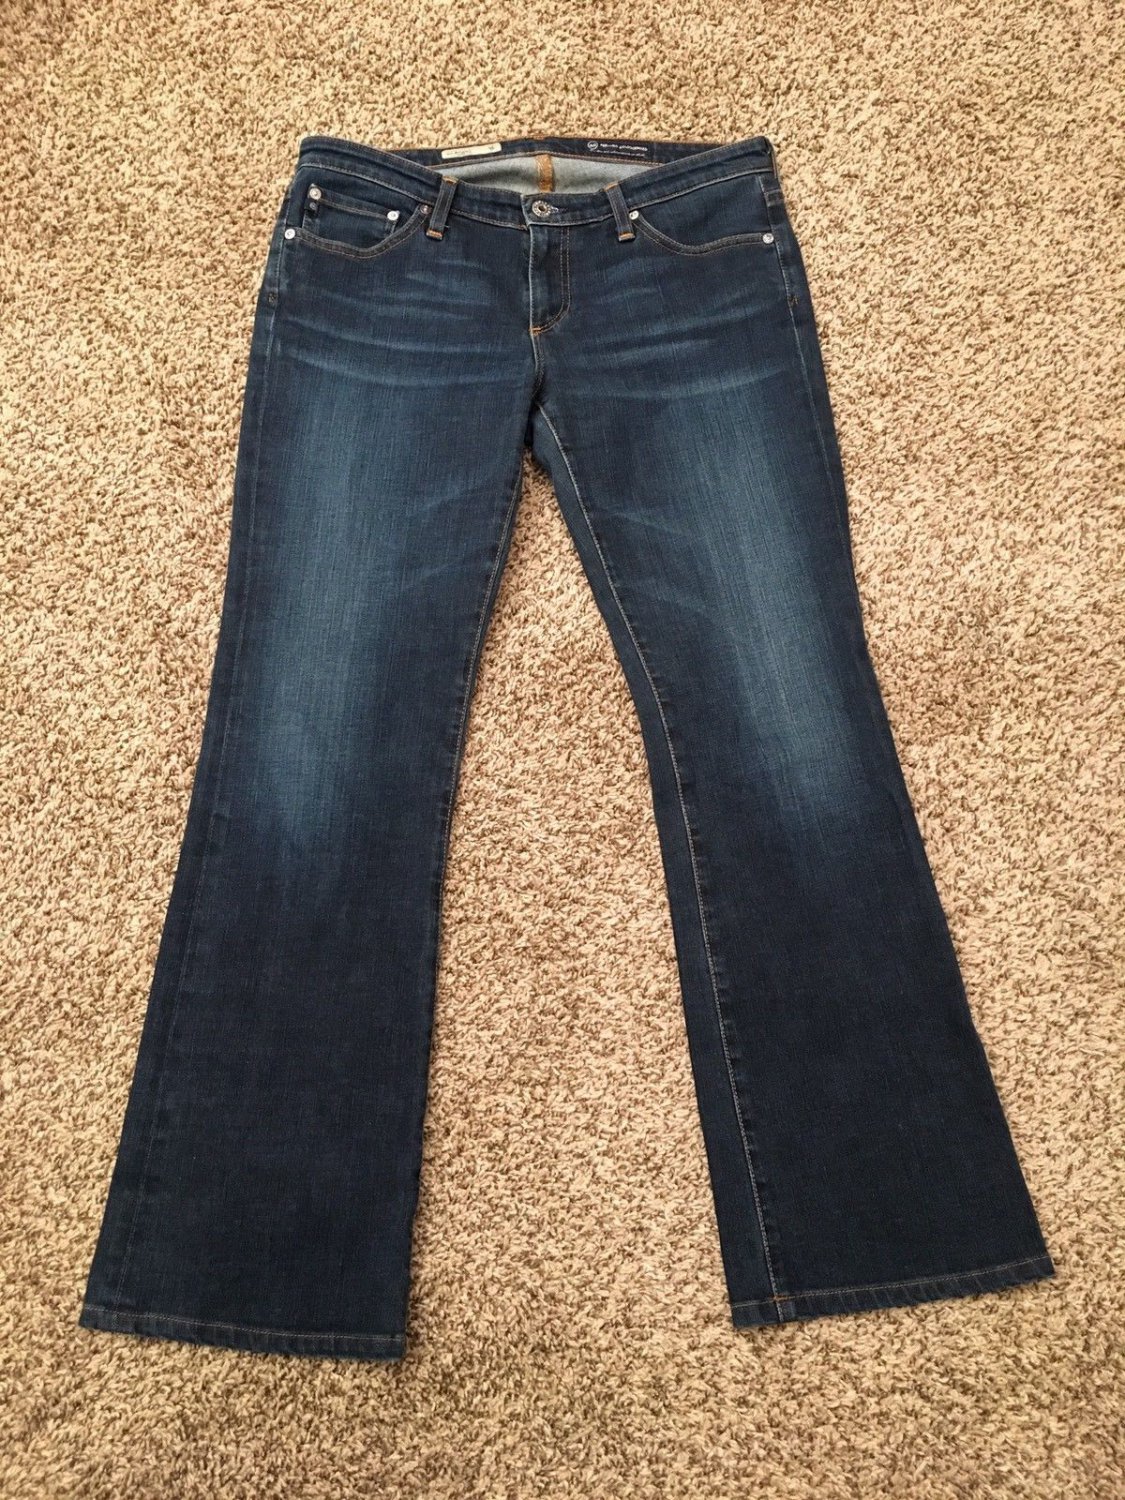 AG Adriano Goldschmied The Angel Boot Cut Womens Jeans Size 30x30